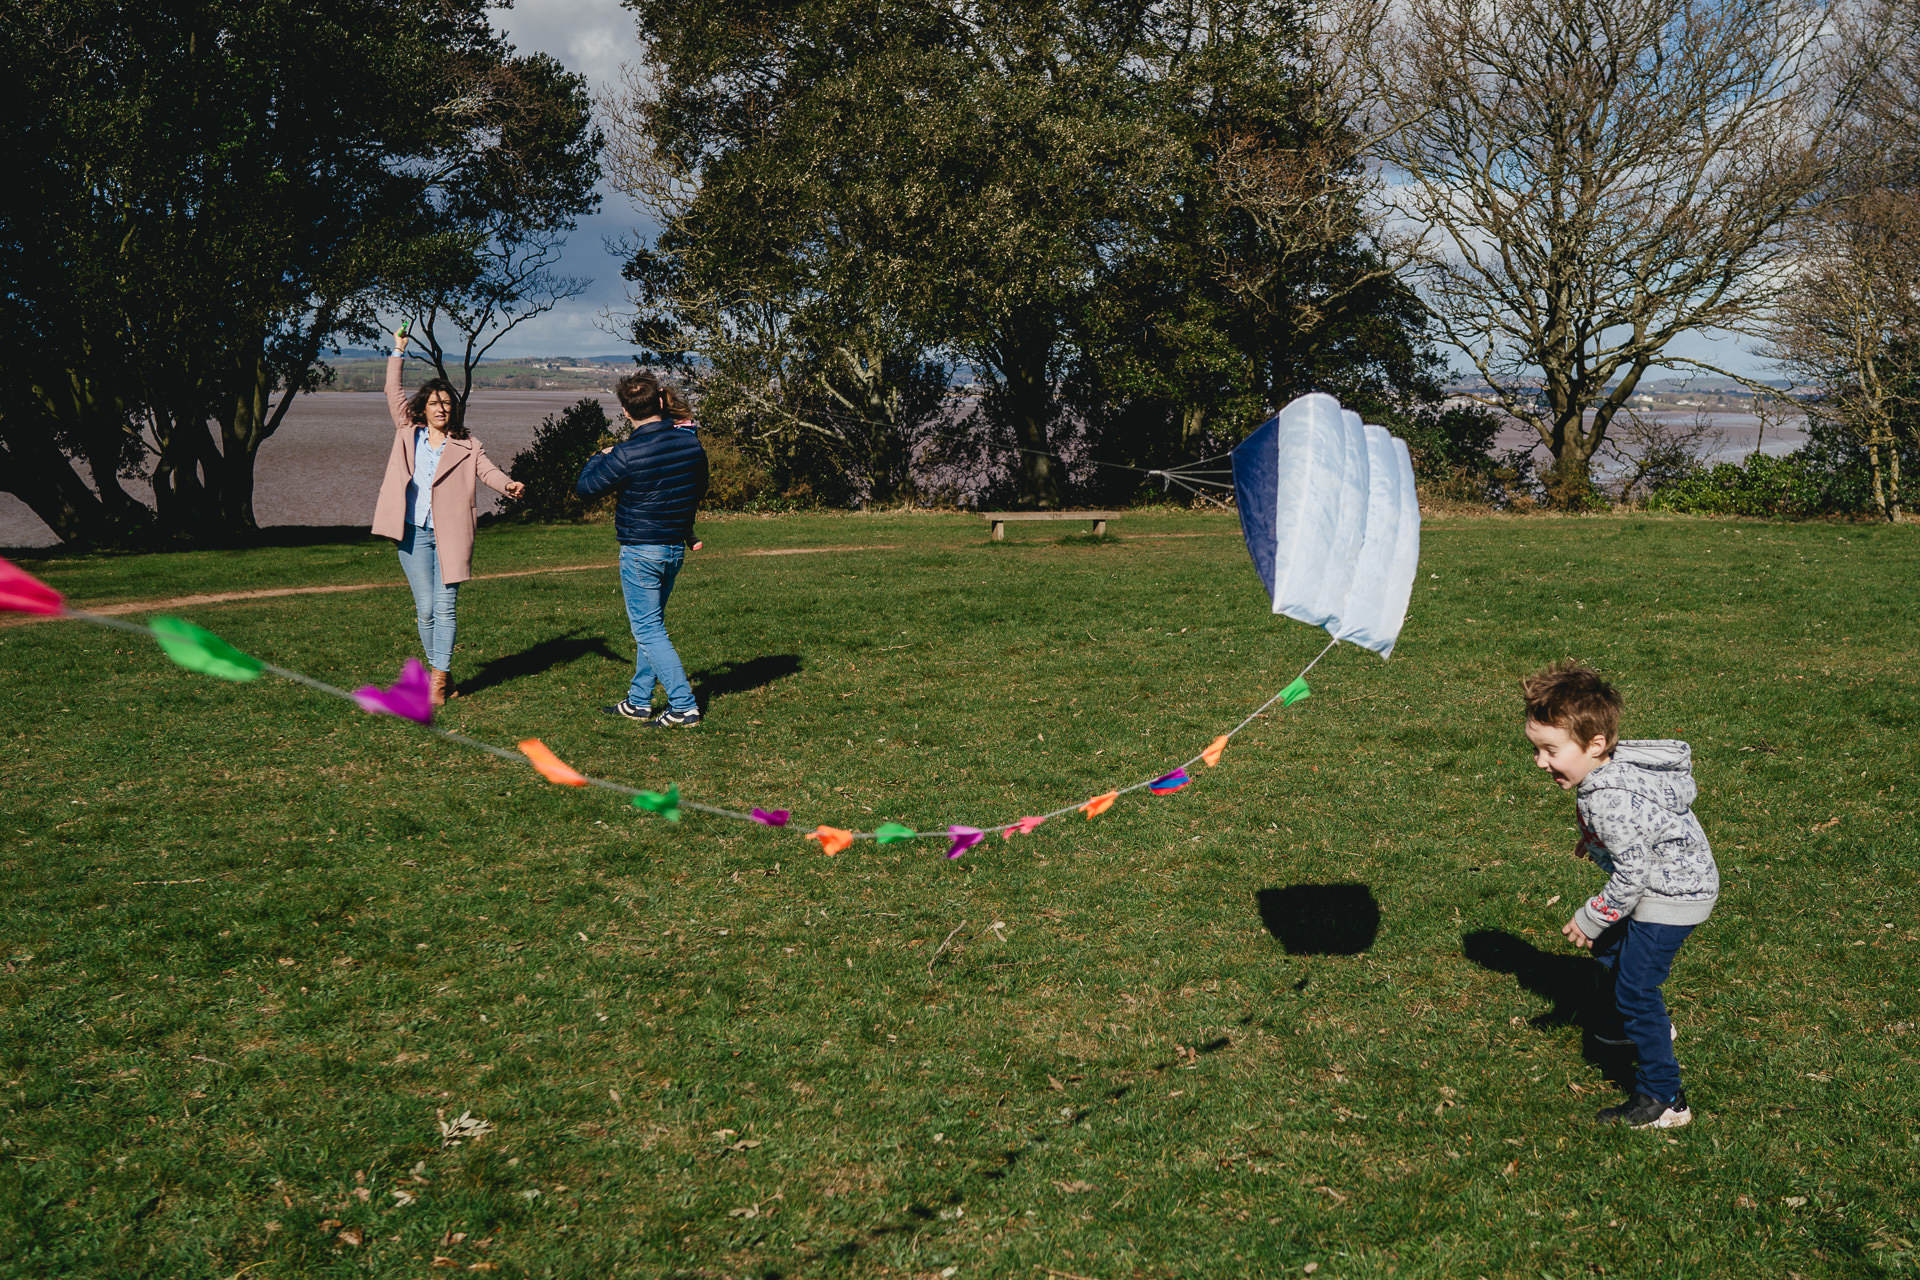 A family playing with a kite together